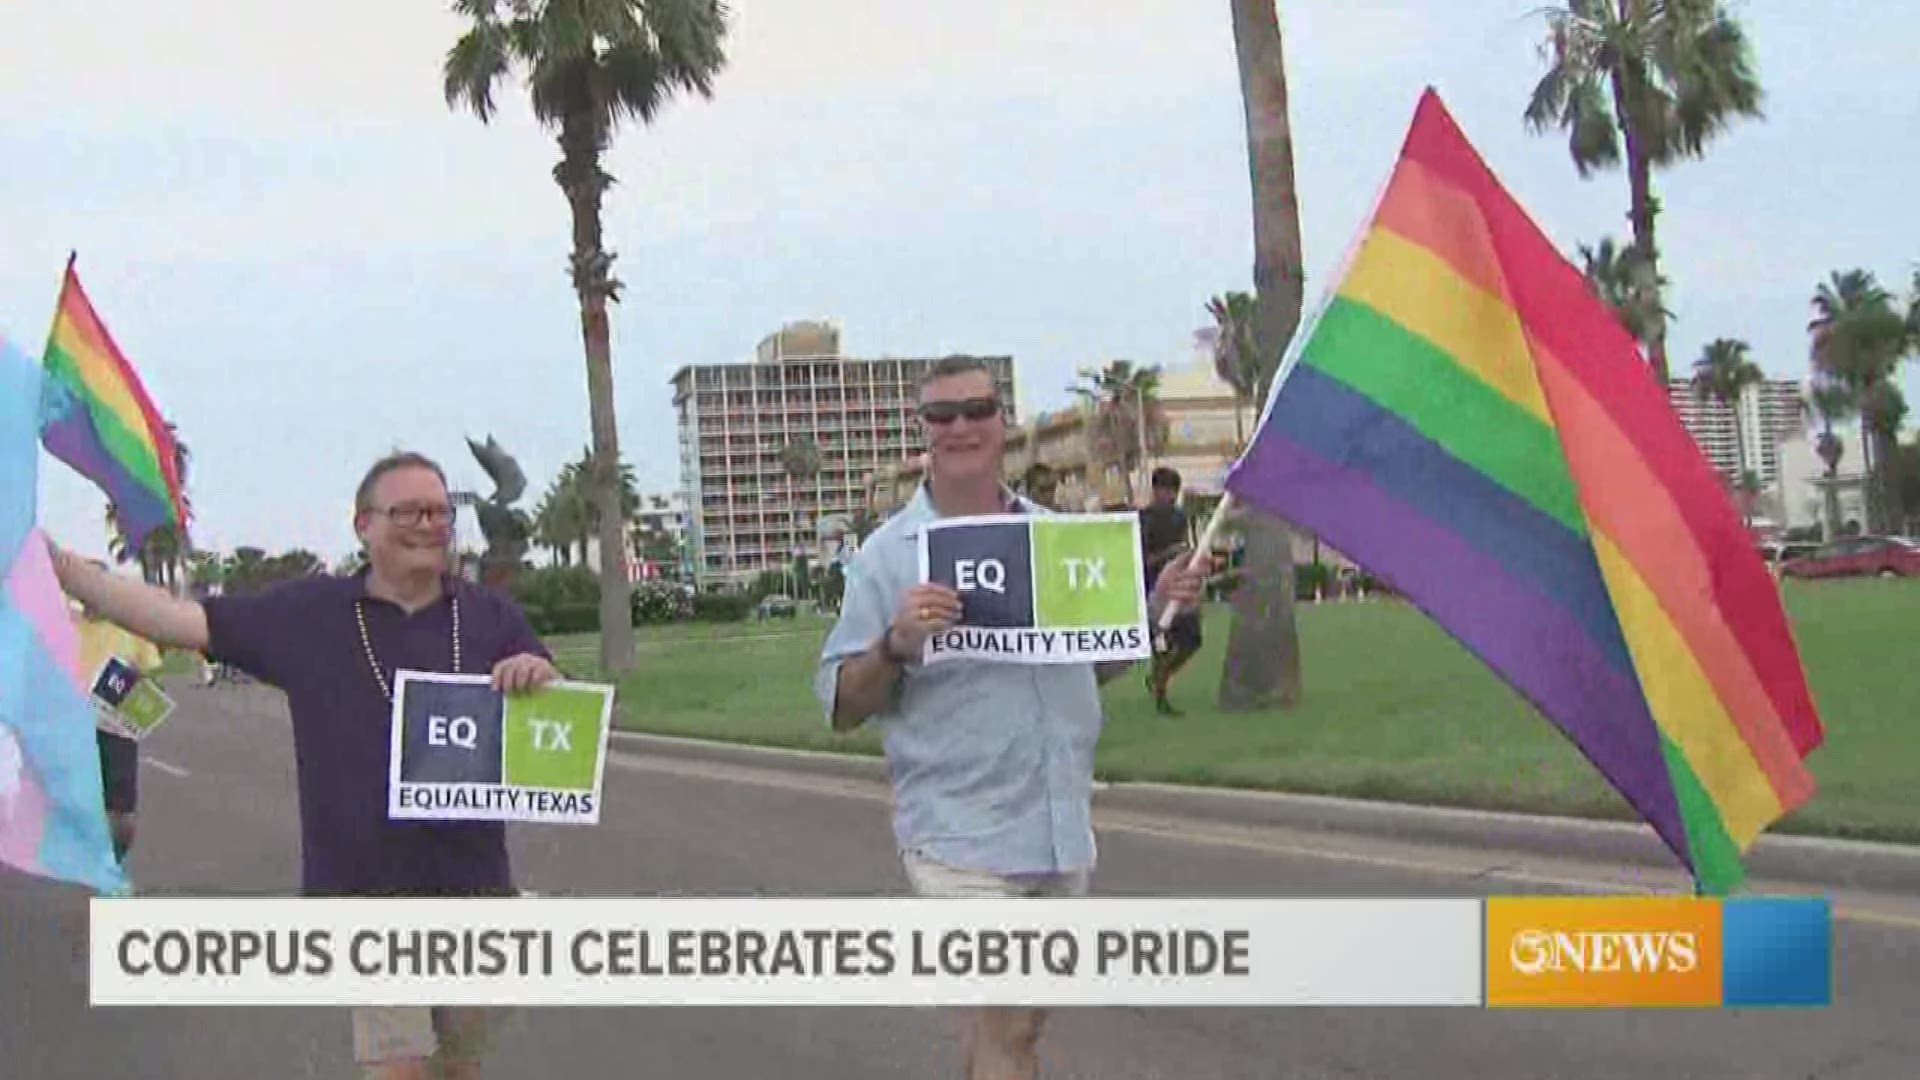 The month of June spotlights the LGBTQ+ community.